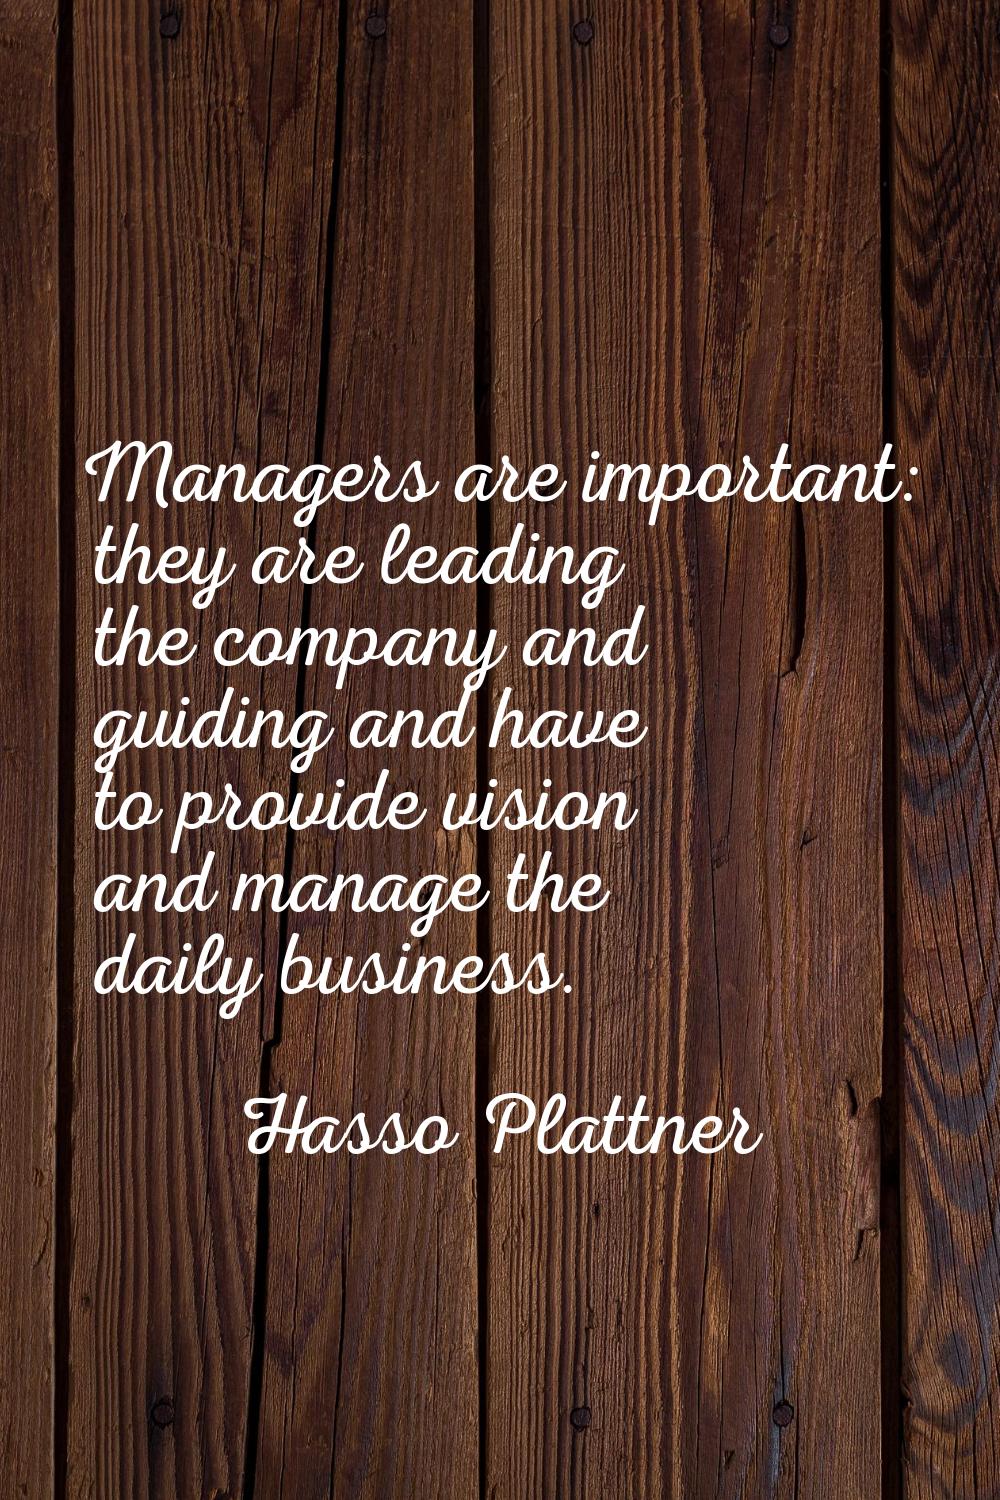 Managers are important: they are leading the company and guiding and have to provide vision and man